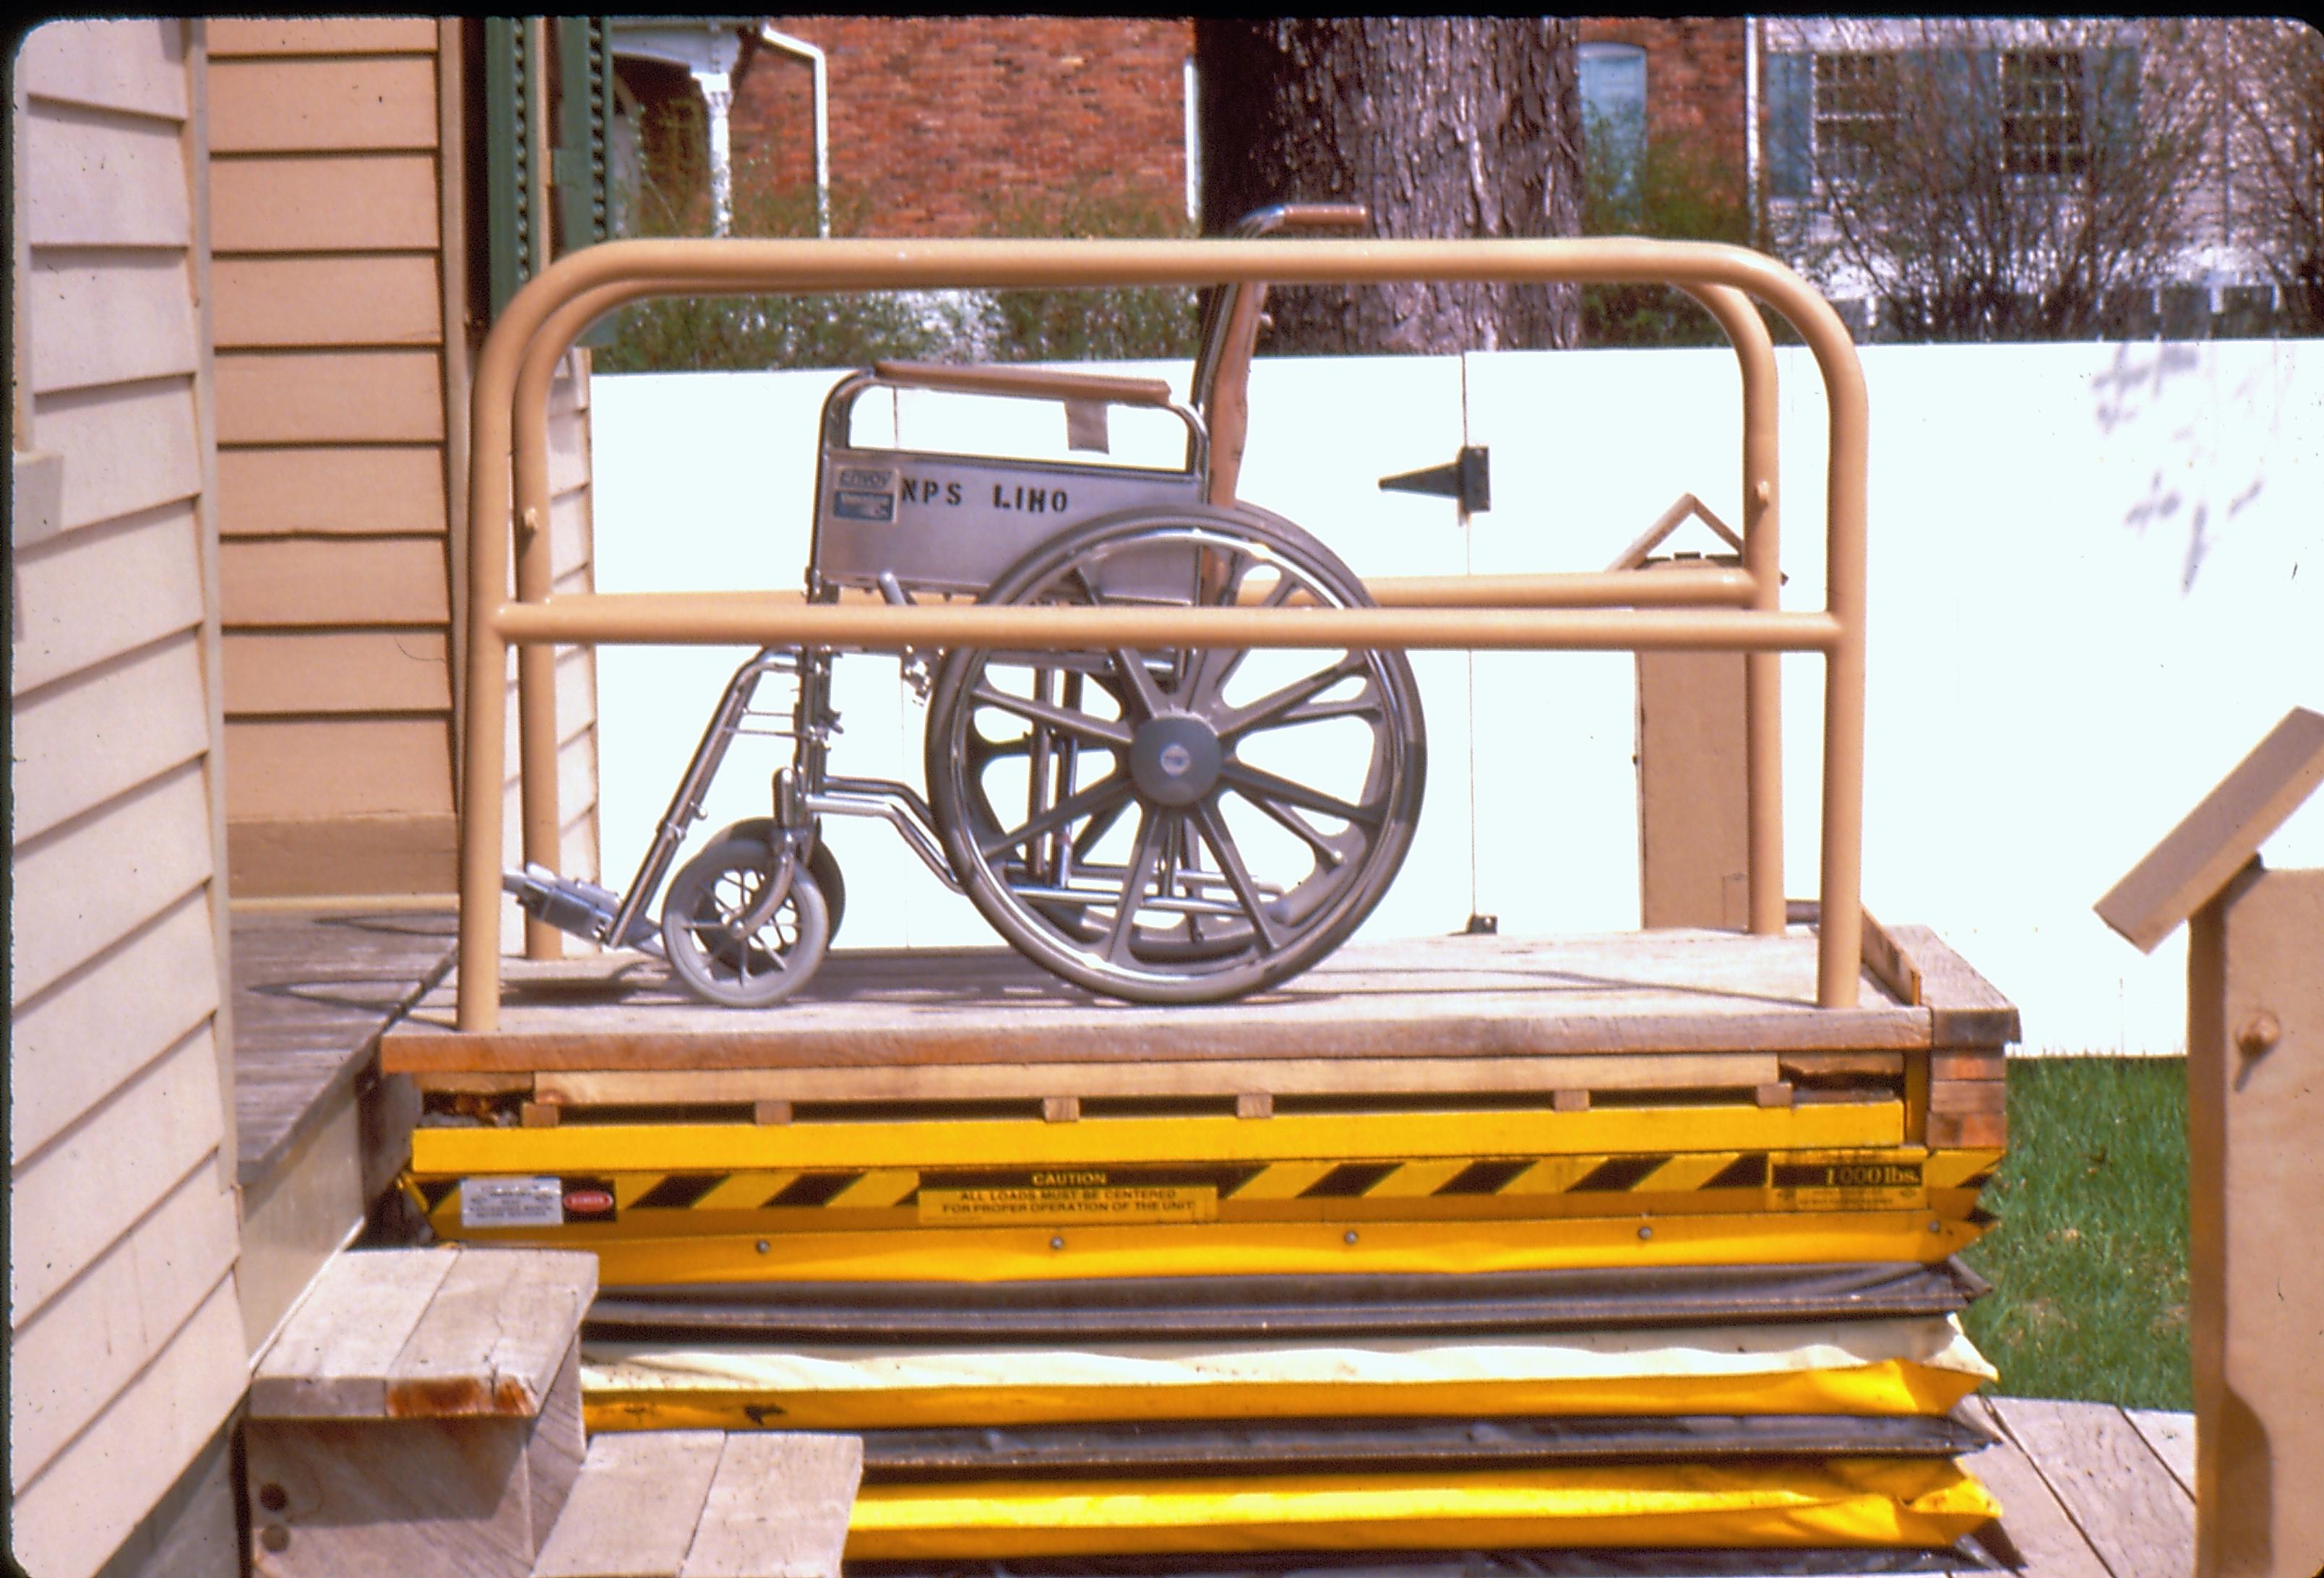 Lincoln Home wheelchair lift at full height, with empty wheelchair. Photographer facing north.